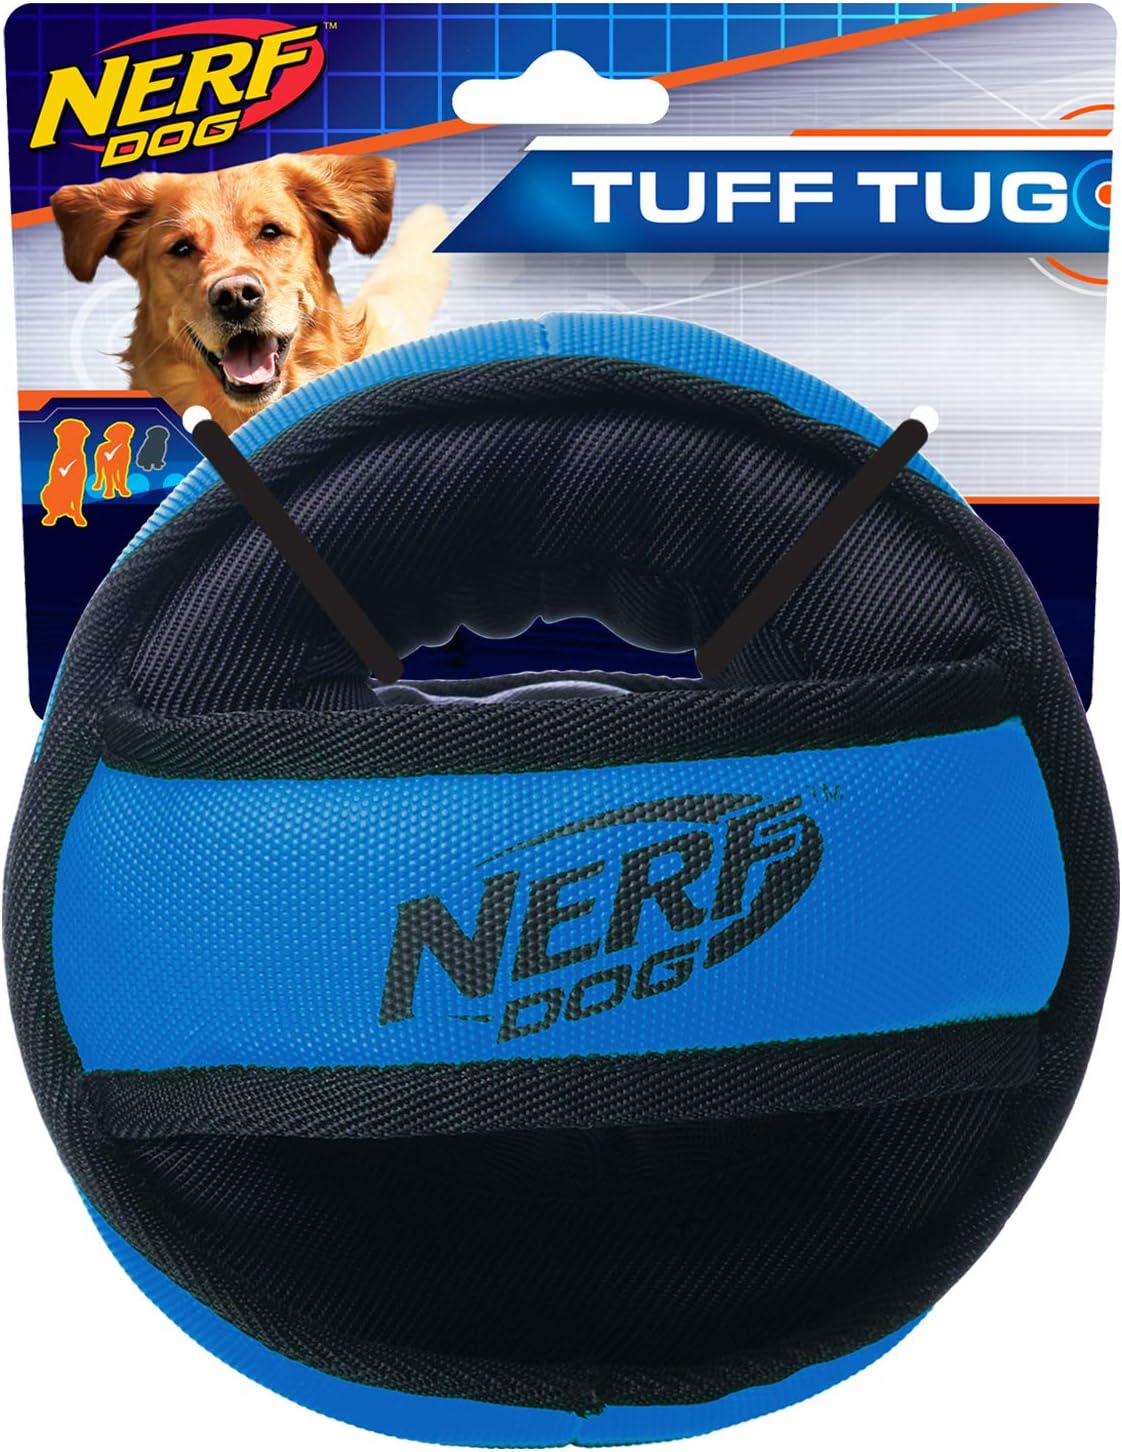 Nerf Dog Chewable Ball Dog Toy with Interactive X-Ring Design, Lightweight, Durable and Water Resistant, 6.5 Inch Diameter for Medium/Large Breeds, Single Unit, Blue